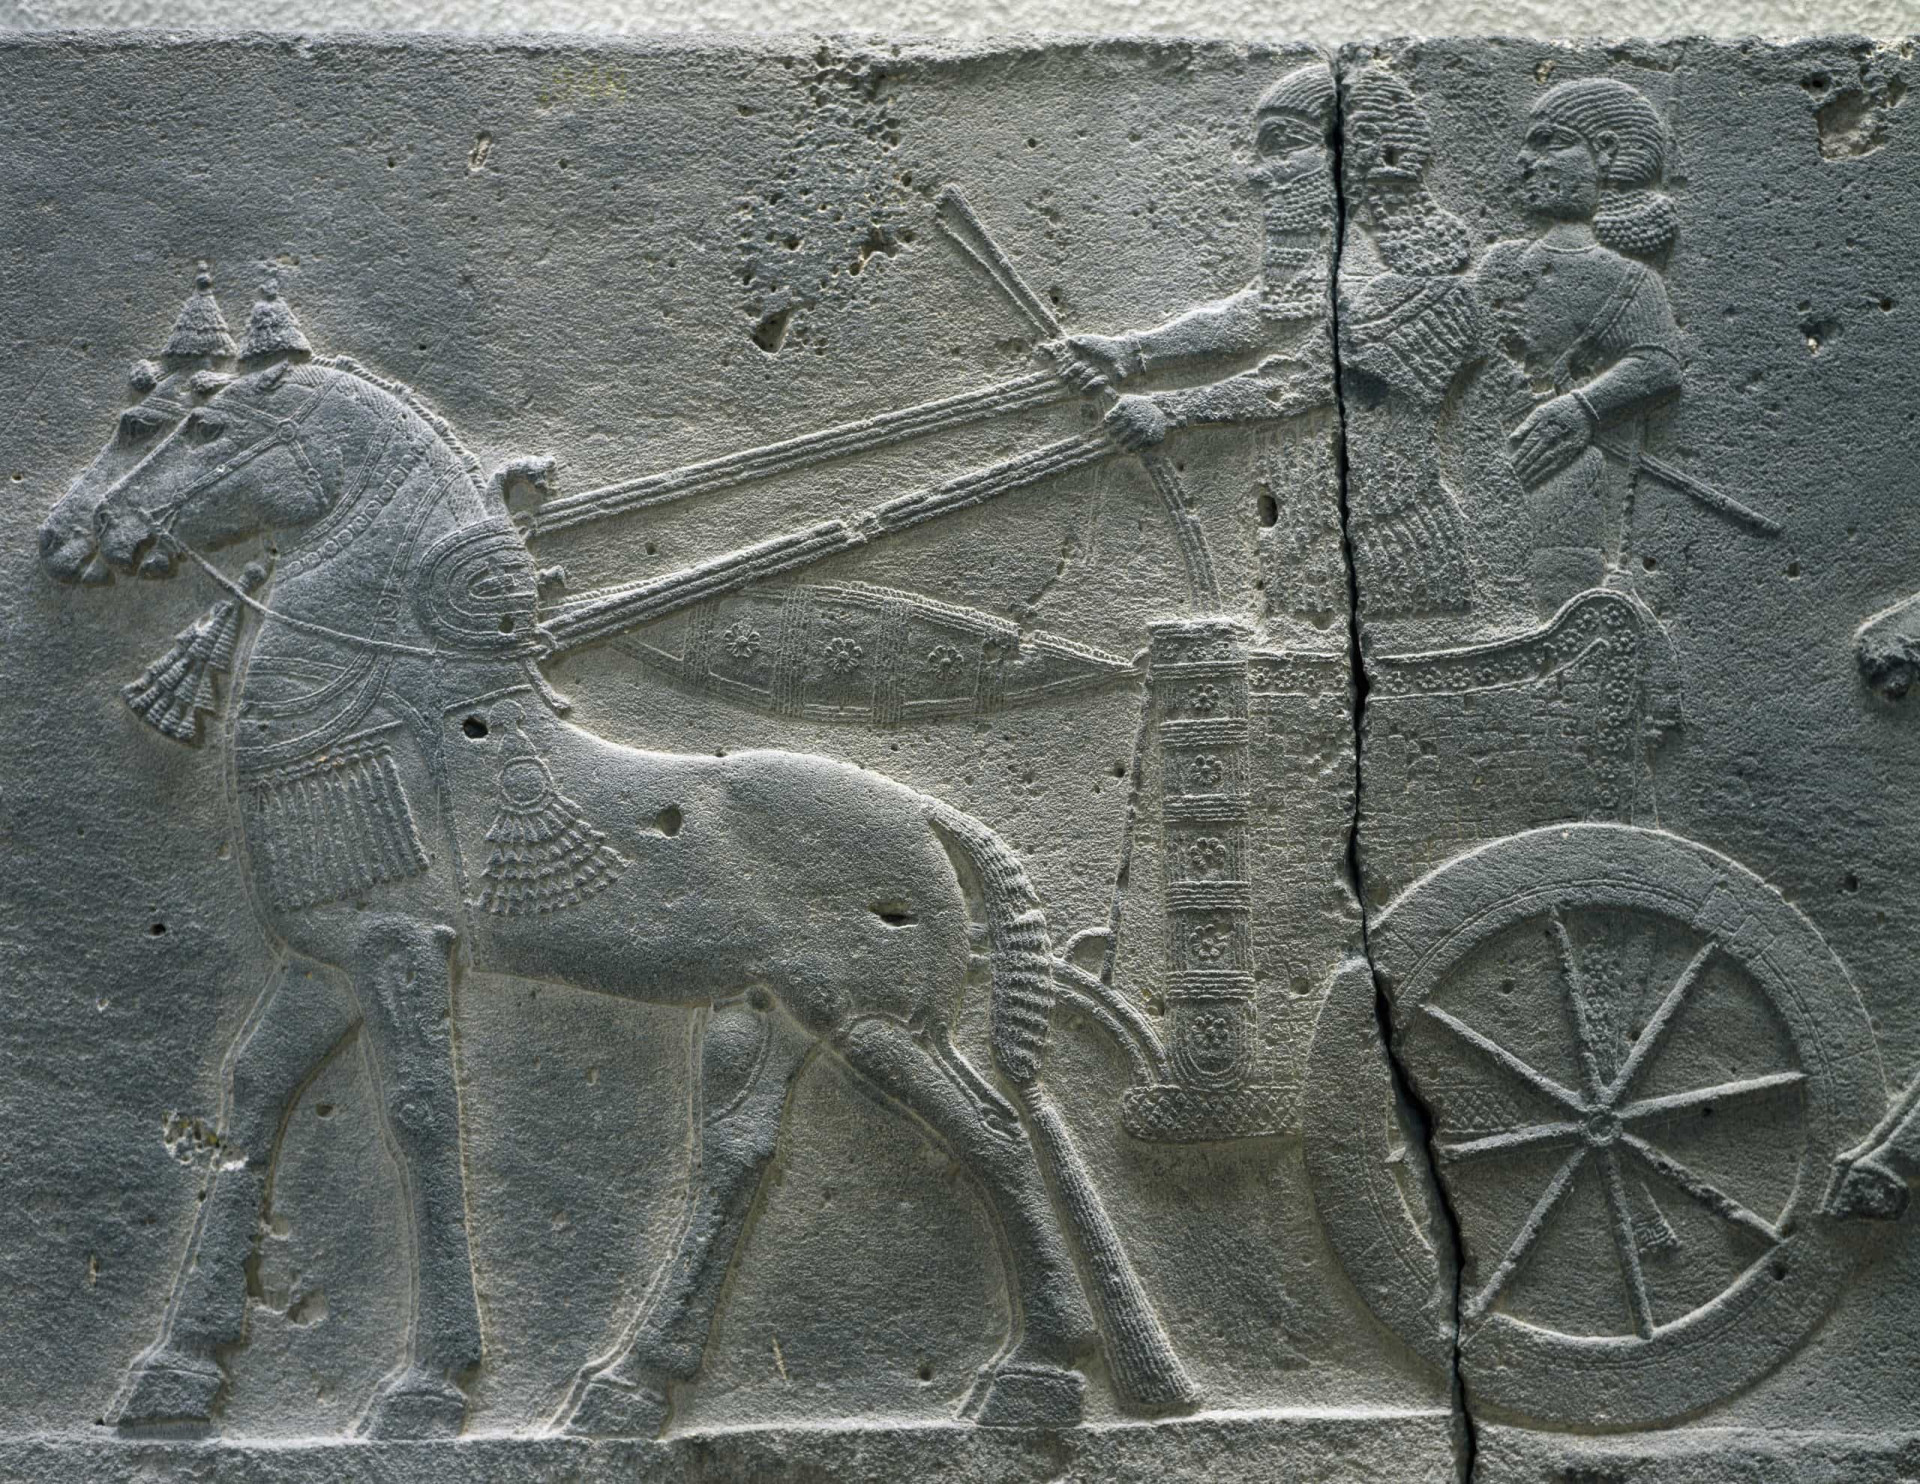 <p>The chariots of antiquity essentially became the first modes of two-wheel horse-drawn transport. Remains of chariots have been discovered from the Indus valley civilization. The ancient Greeks, Egyptians, and Romans all used chariots for warfare. This photograph depicts a basalt relief of the royal chariot from the palace of the 8th-century BCE Assyrian king Tiglath-Pileser III.</p><p><a href="https://www.msn.com/en-us/community/channel/vid-7xx8mnucu55yw63we9va2gwr7uihbxwc68fxqp25x6tg4ftibpra?cvid=94631541bc0f4f89bfd59158d696ad7e">Follow us and access great exclusive content every day</a></p>